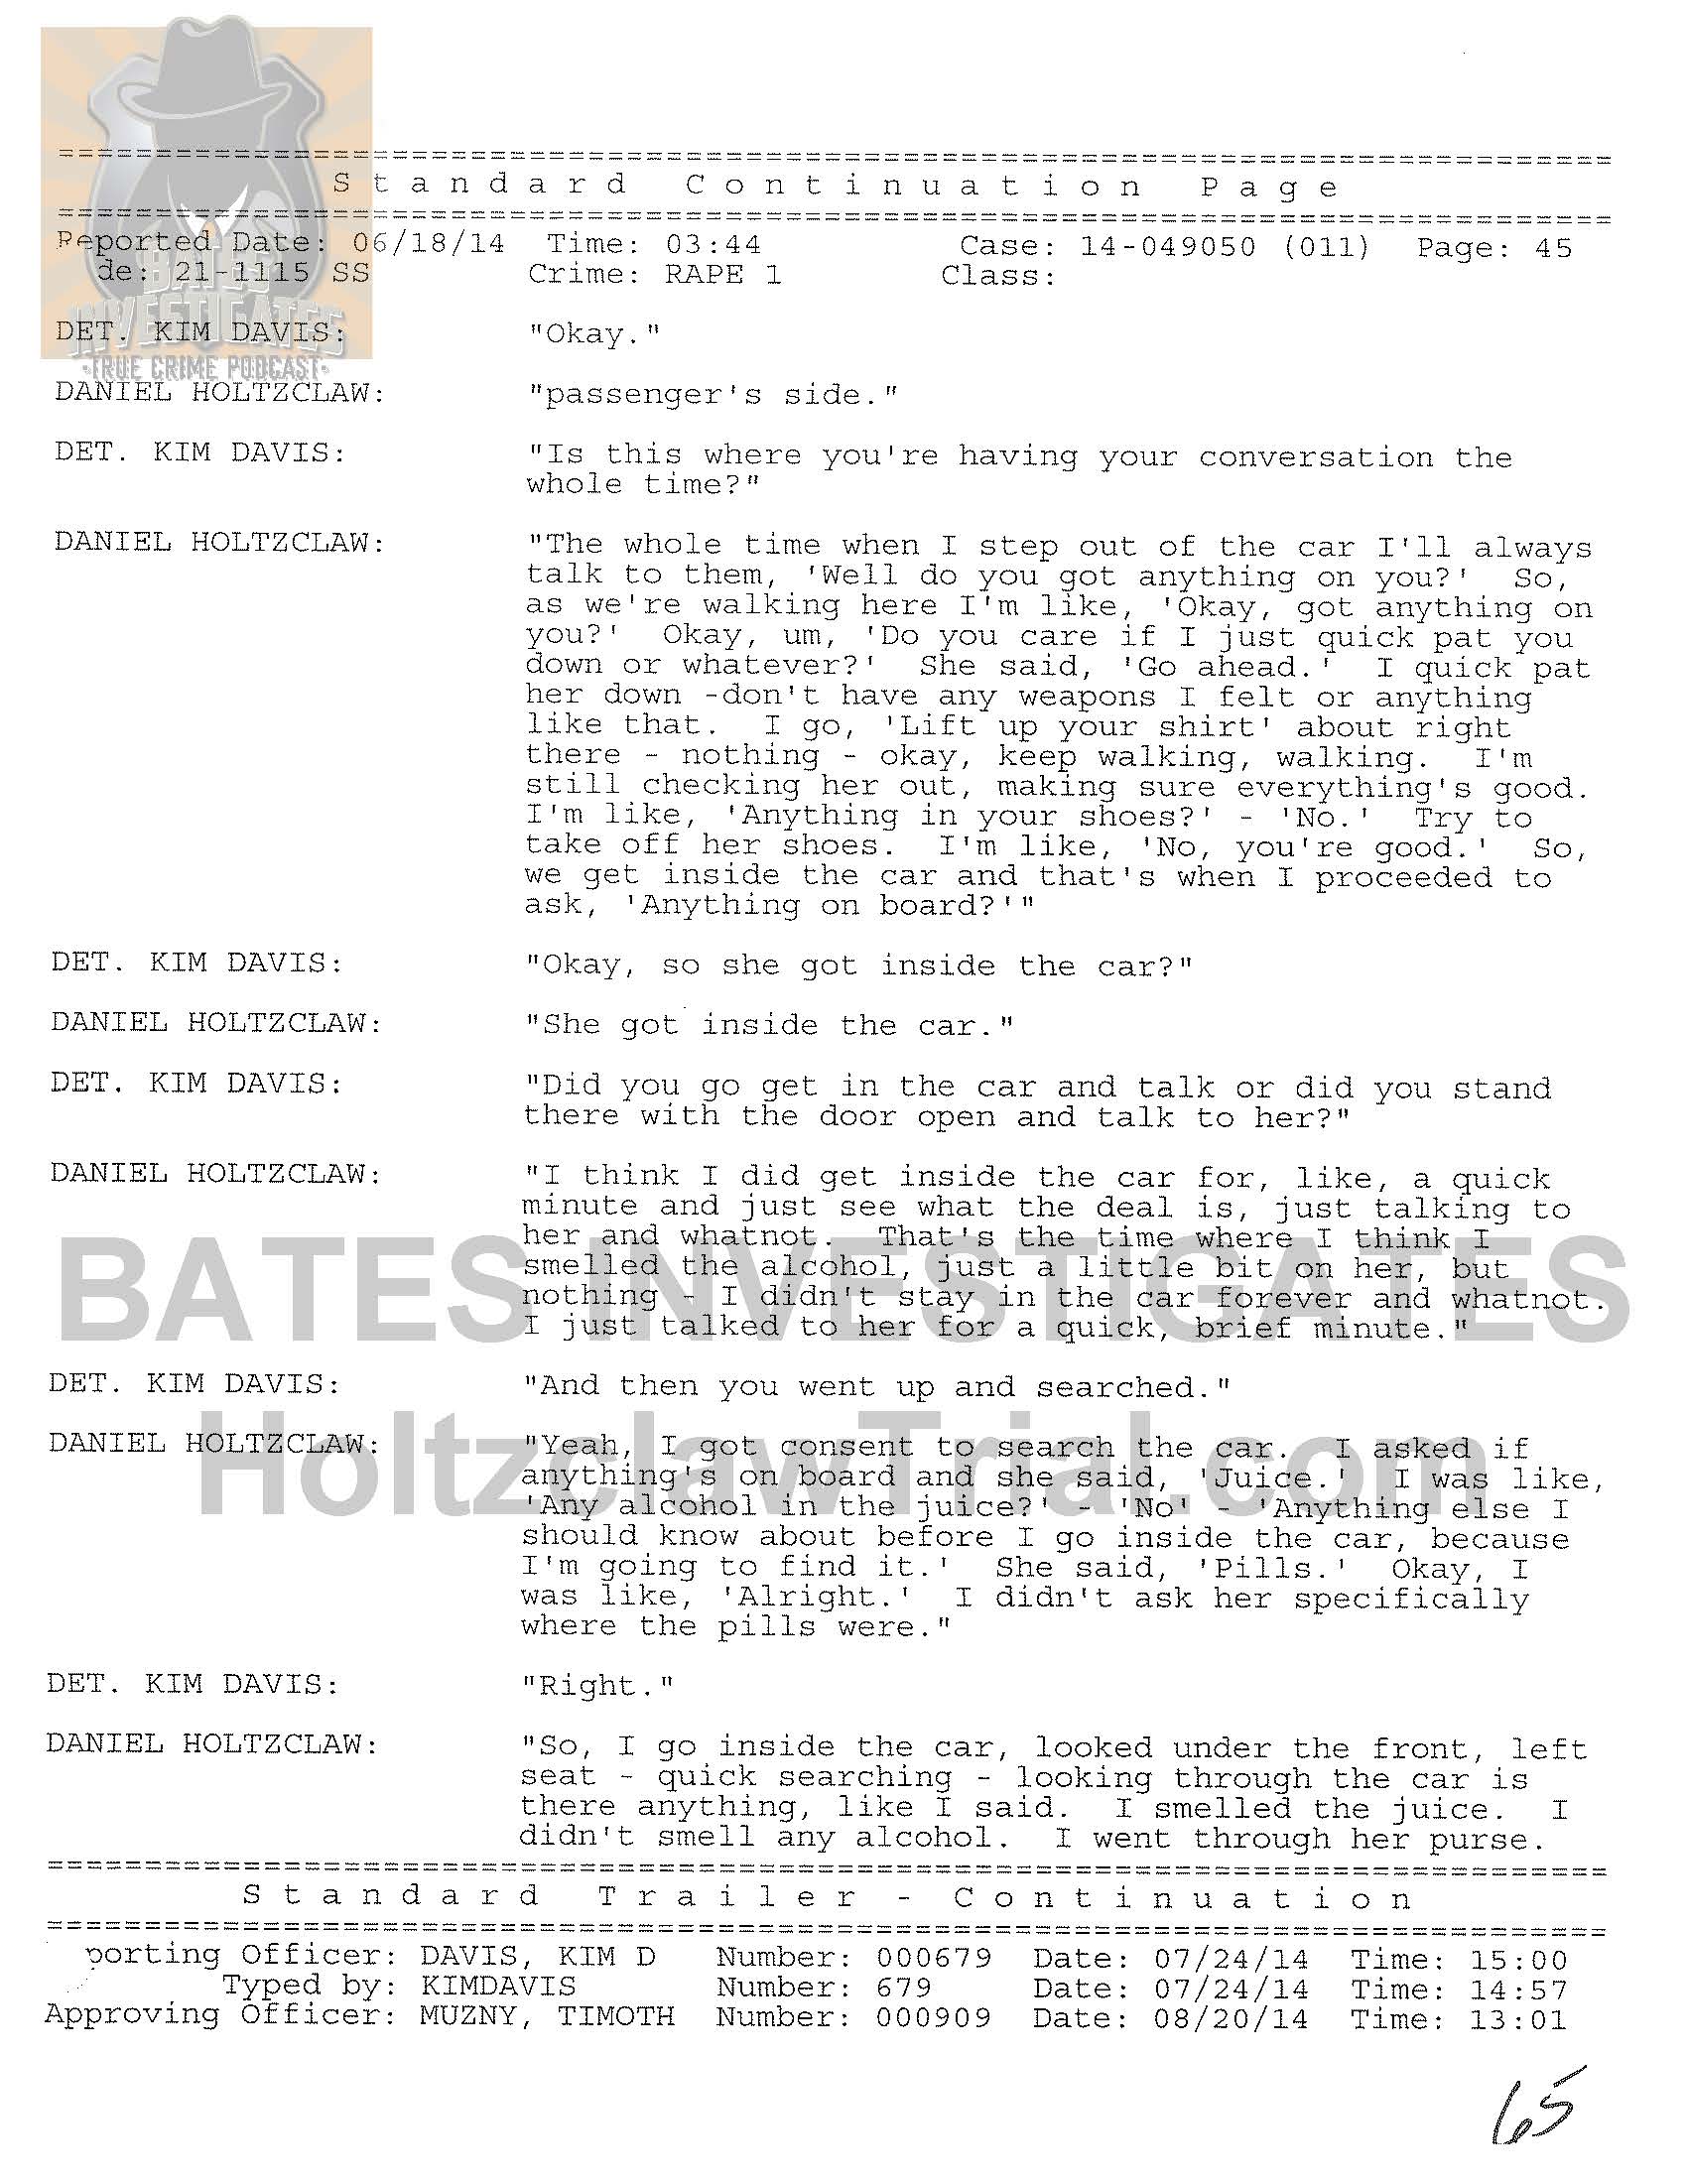 Holtzclaw Interrogation Transcript - Ep02 Redacted_Page_45.jpg